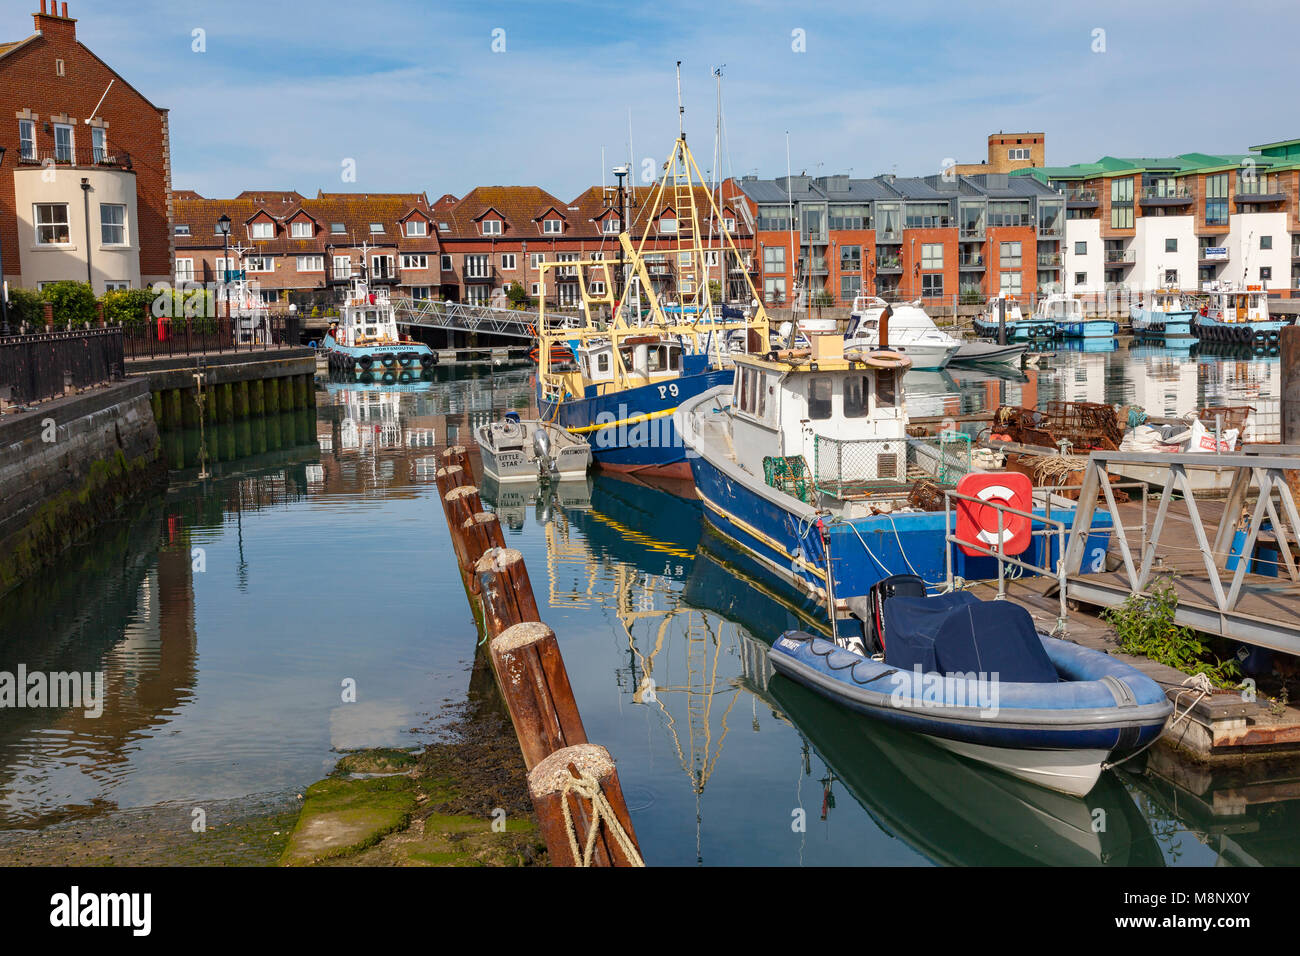 Views across the docks in Old Portsmouth, with fishing boats, and tug boats moored, Portsmouth, Hampshire, UK Stock Photo